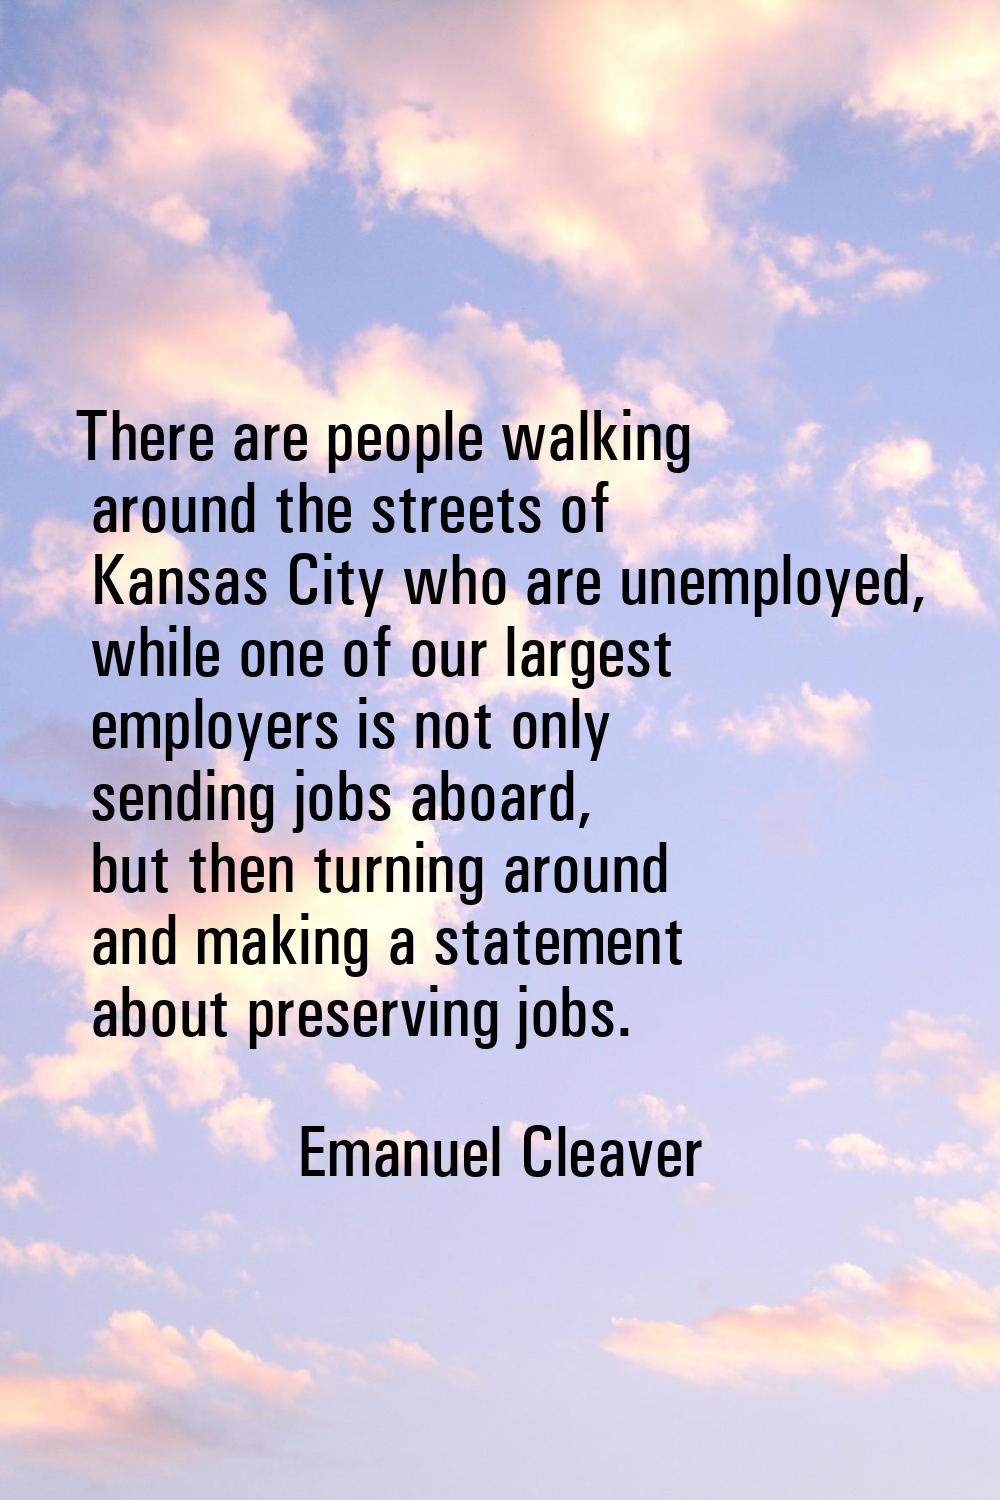 There are people walking around the streets of Kansas City who are unemployed, while one of our lar